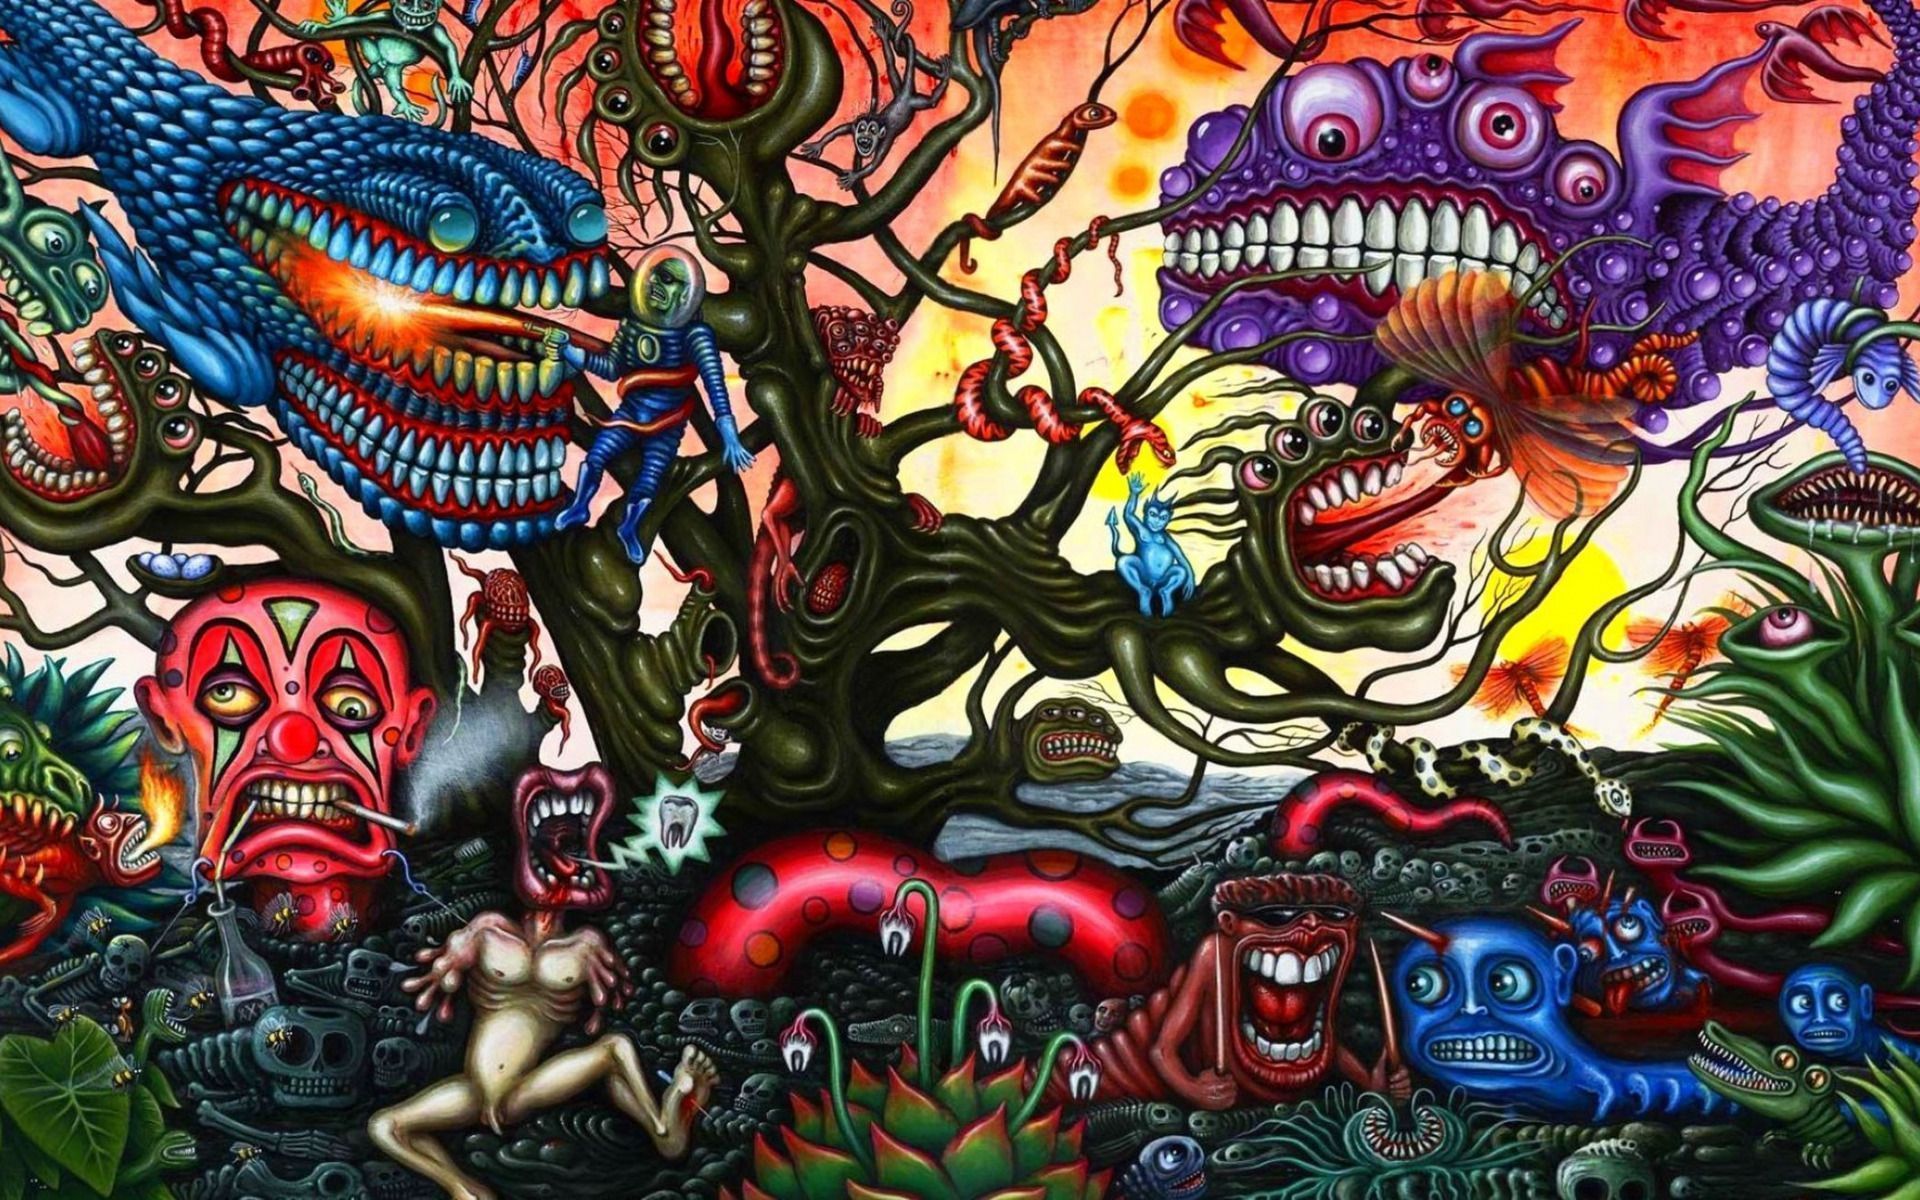 Download wallpaper astronaut, dark, monsters, creatures, fantasy, evil, psychedelic, creepy, nightmare, toothy, dream, psy art, other worlds, smoking head, section fantasy in resolution 1920x1200